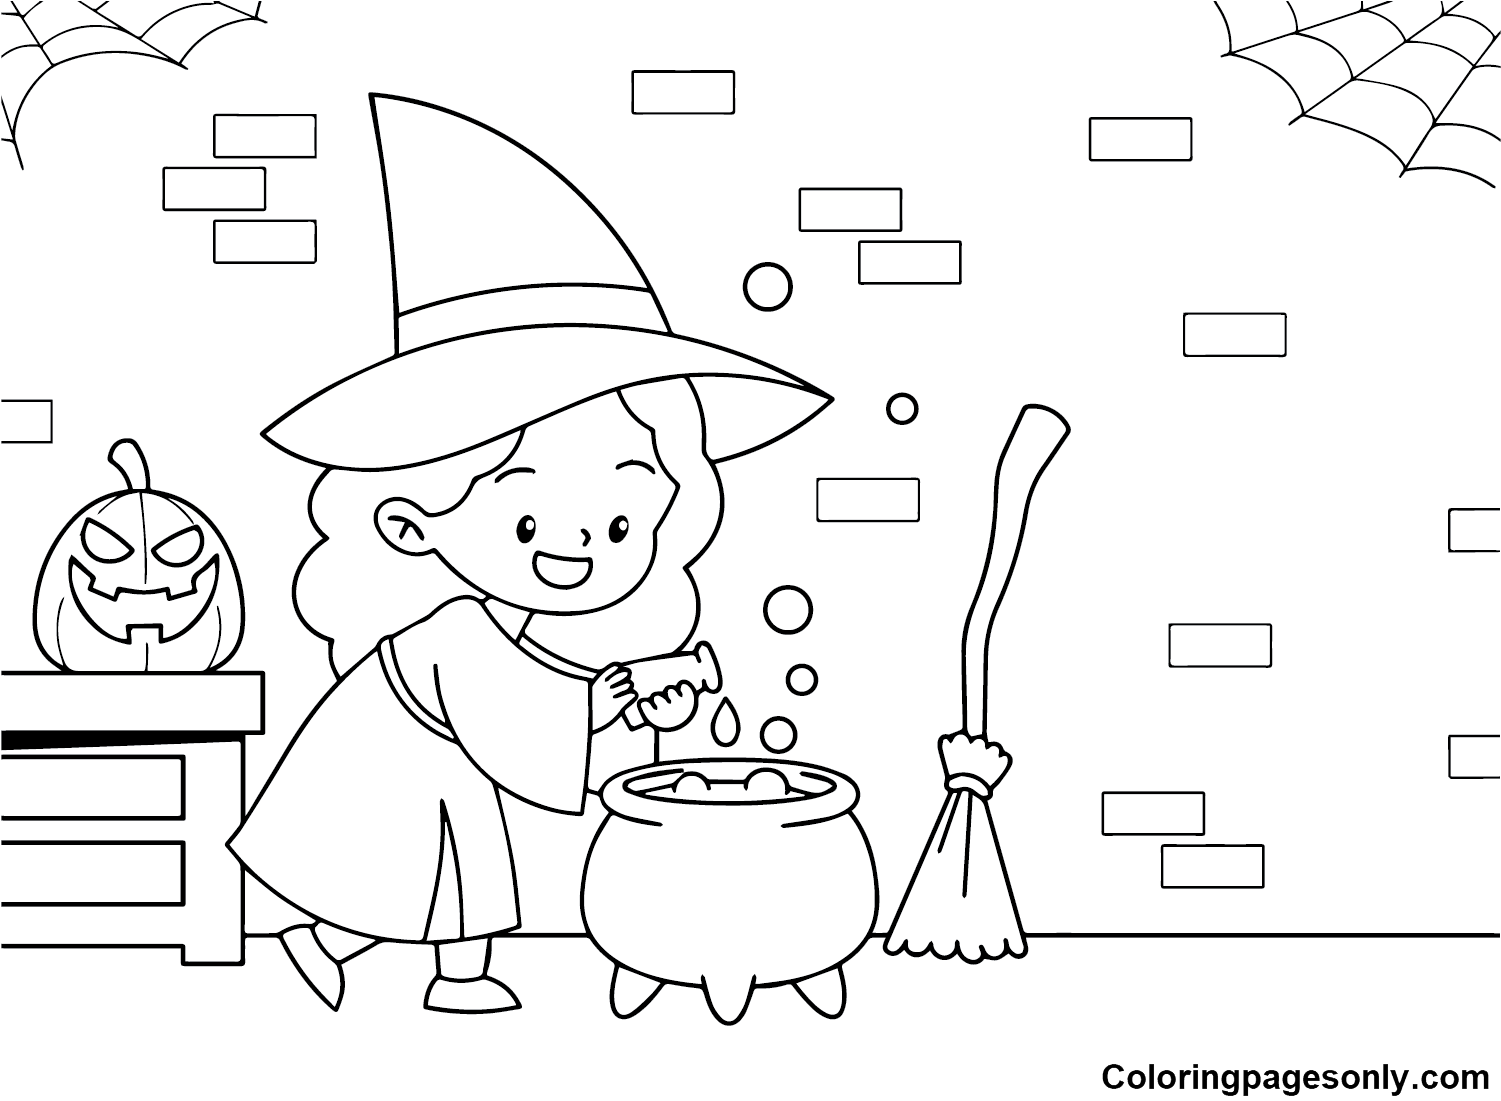 Hocus Pocus Witches Images Coloring Pages